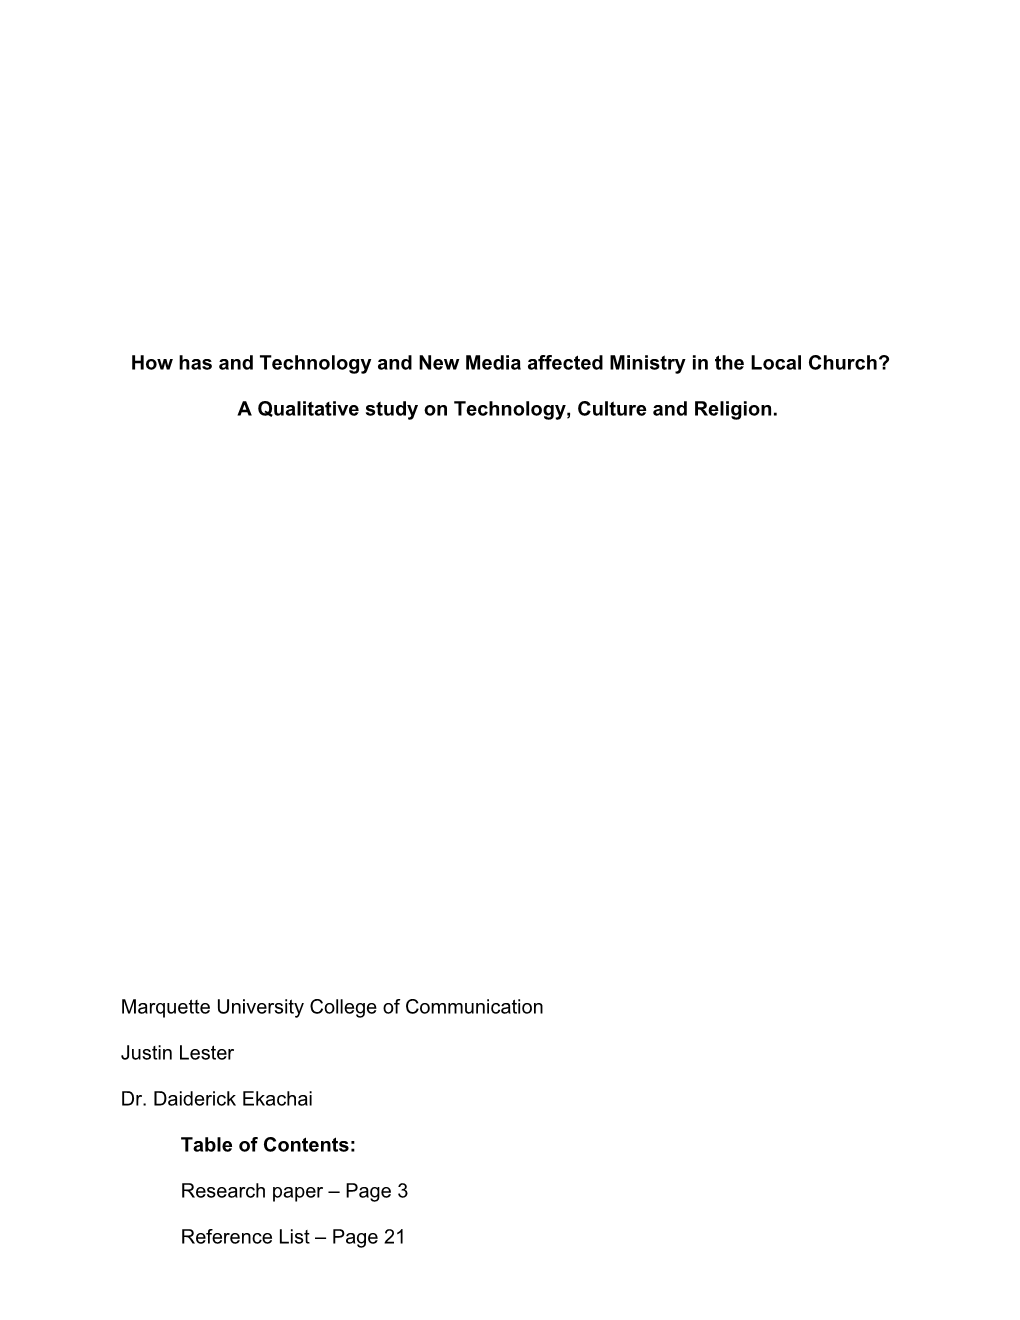 A Qualitative Study on Technology, Culture and Religion